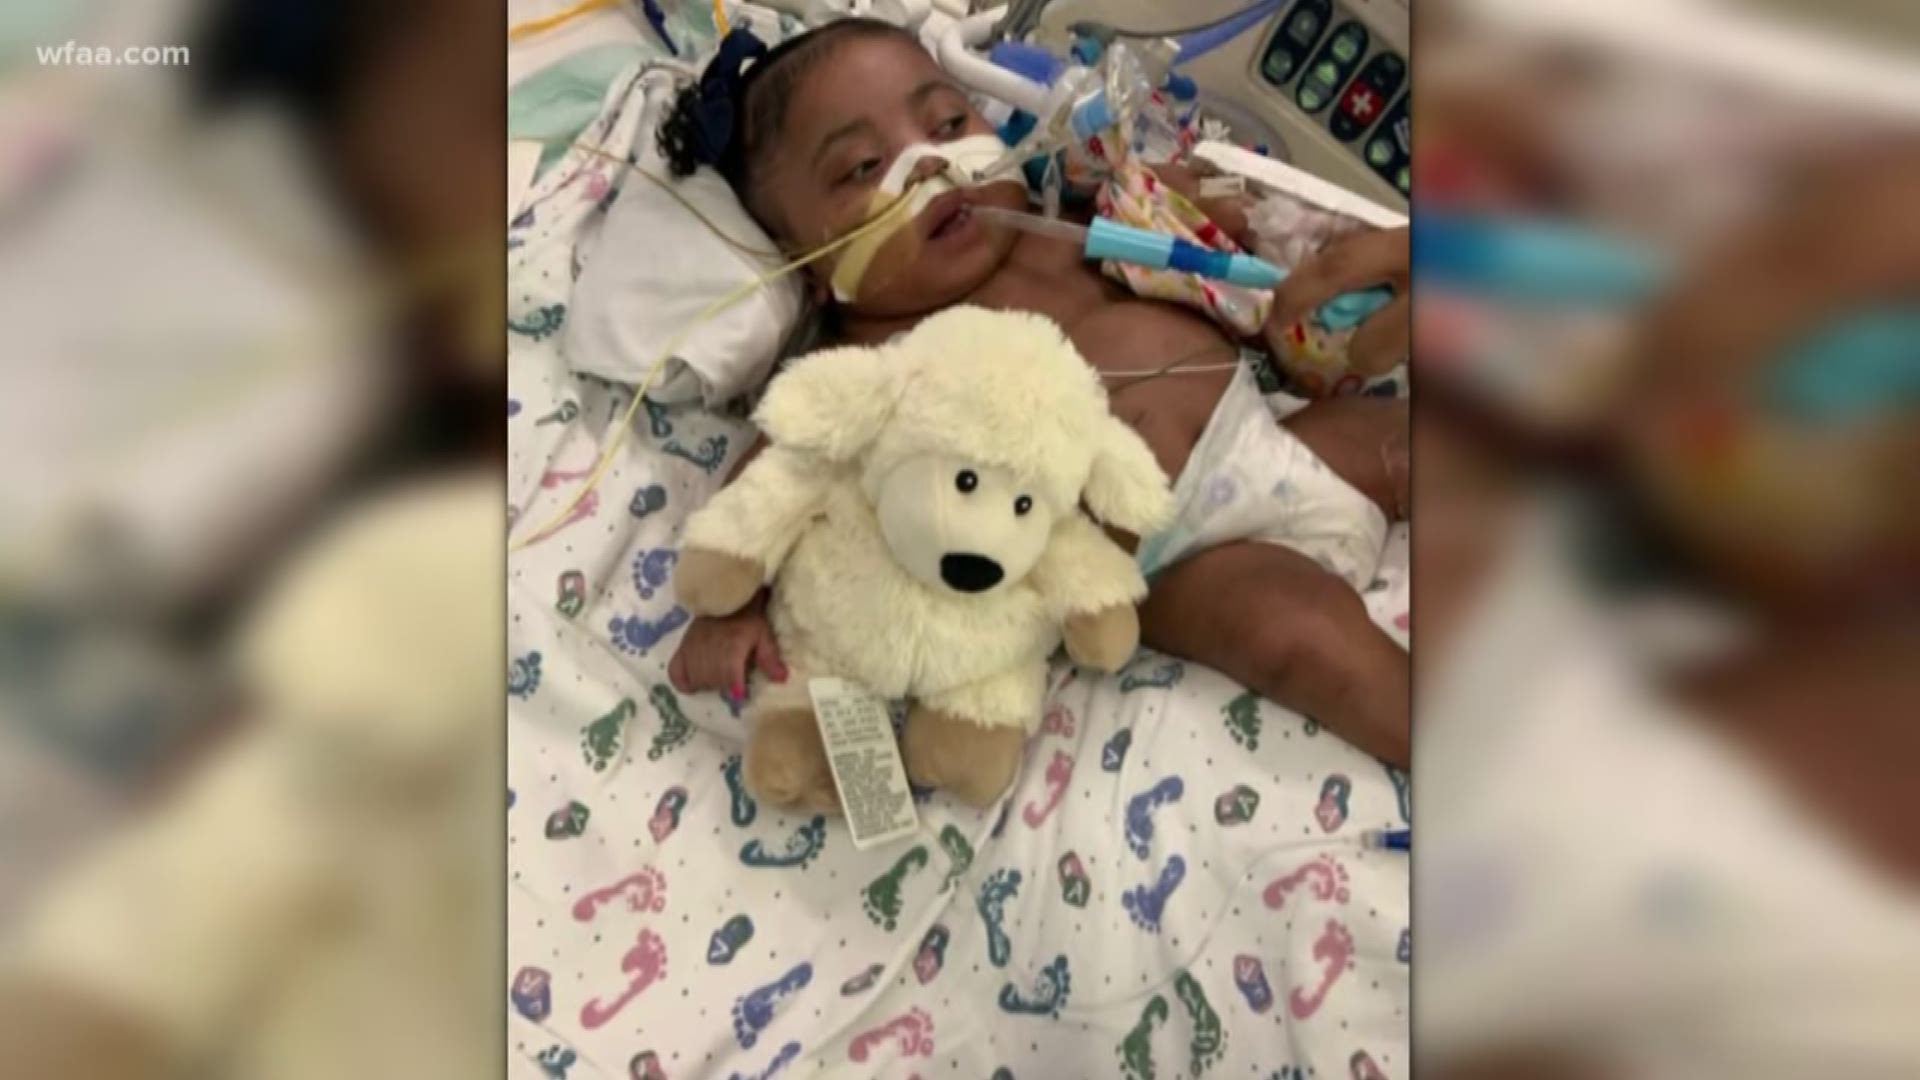 The family of 9-month-old Tinslee Lewis has been granted a temporary restraining order that will protect the baby from being taken off life support Sunday.